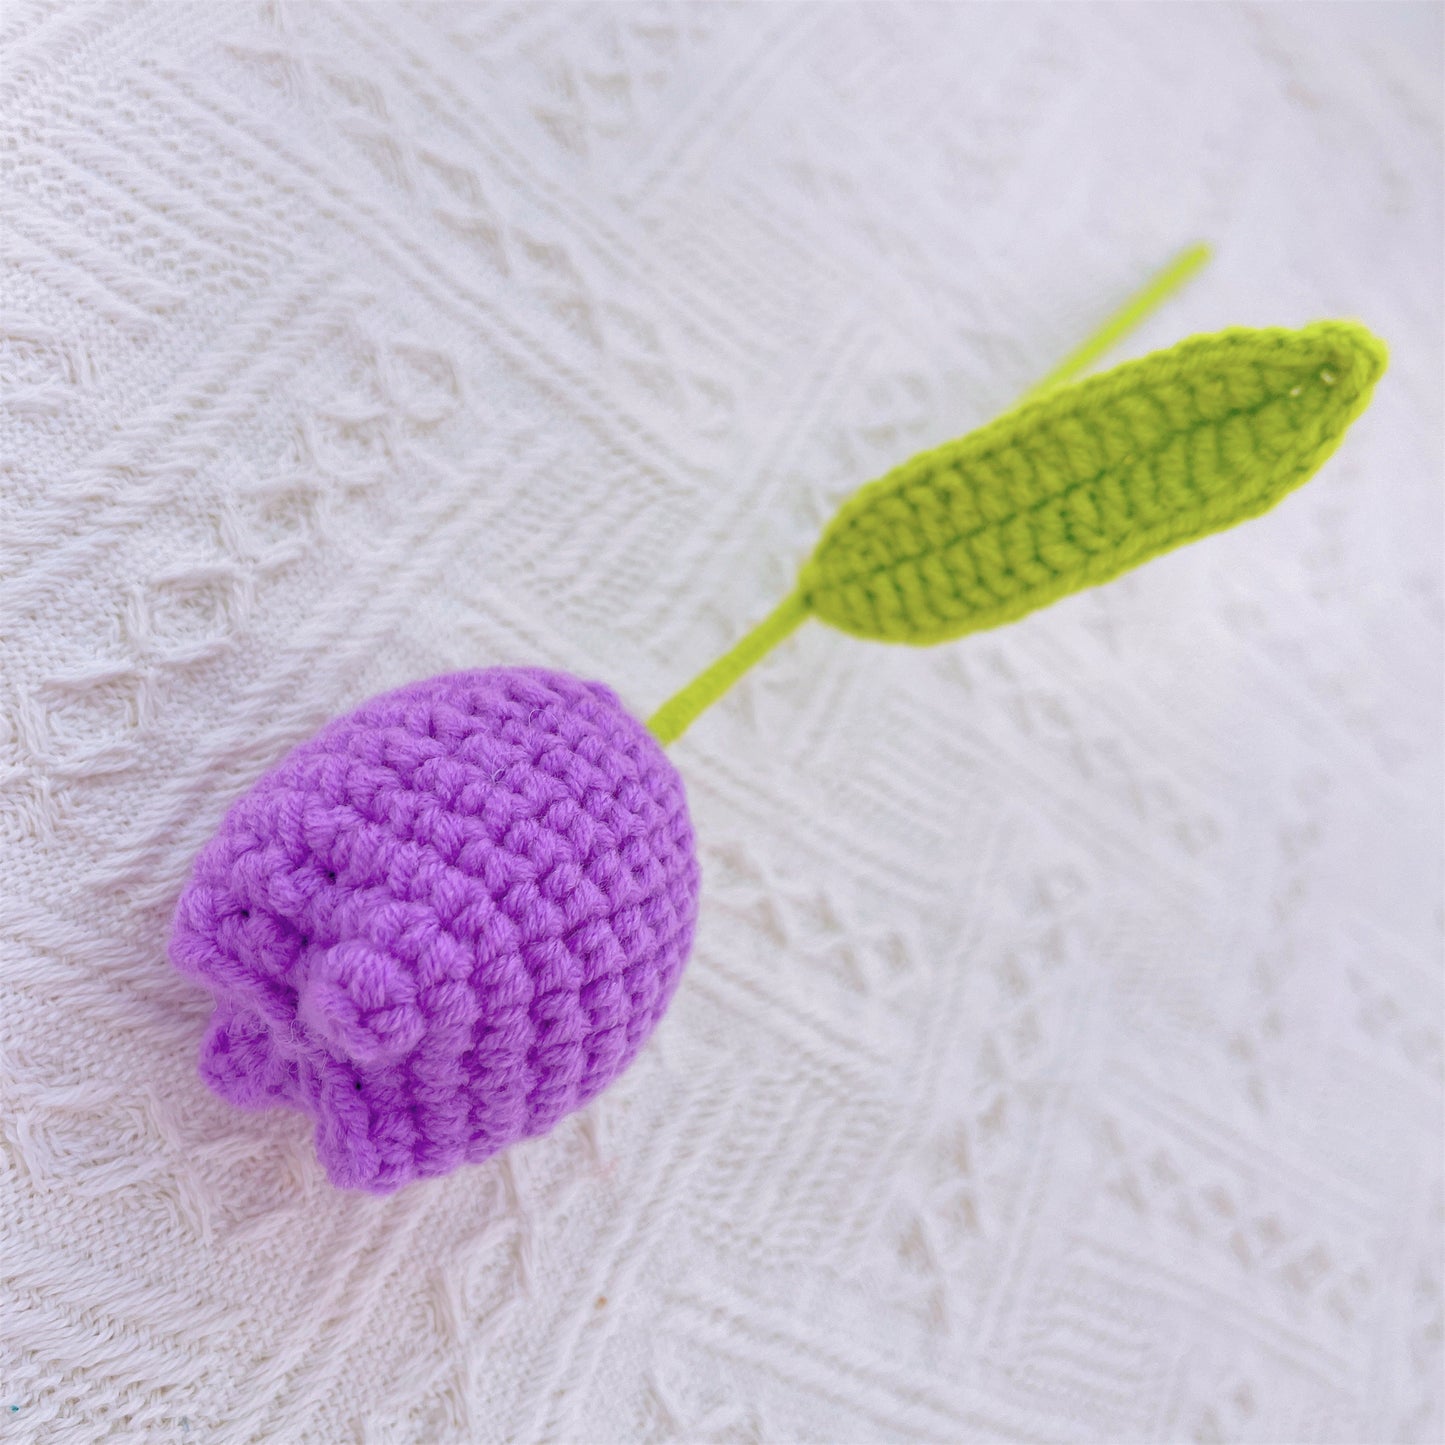 Elegant and Lifelike Handmade Crochet Tulip - Beautiful Replica with Stalk, Home Decor and Gift Giving, Housewarming Gifts, Desk Decoration